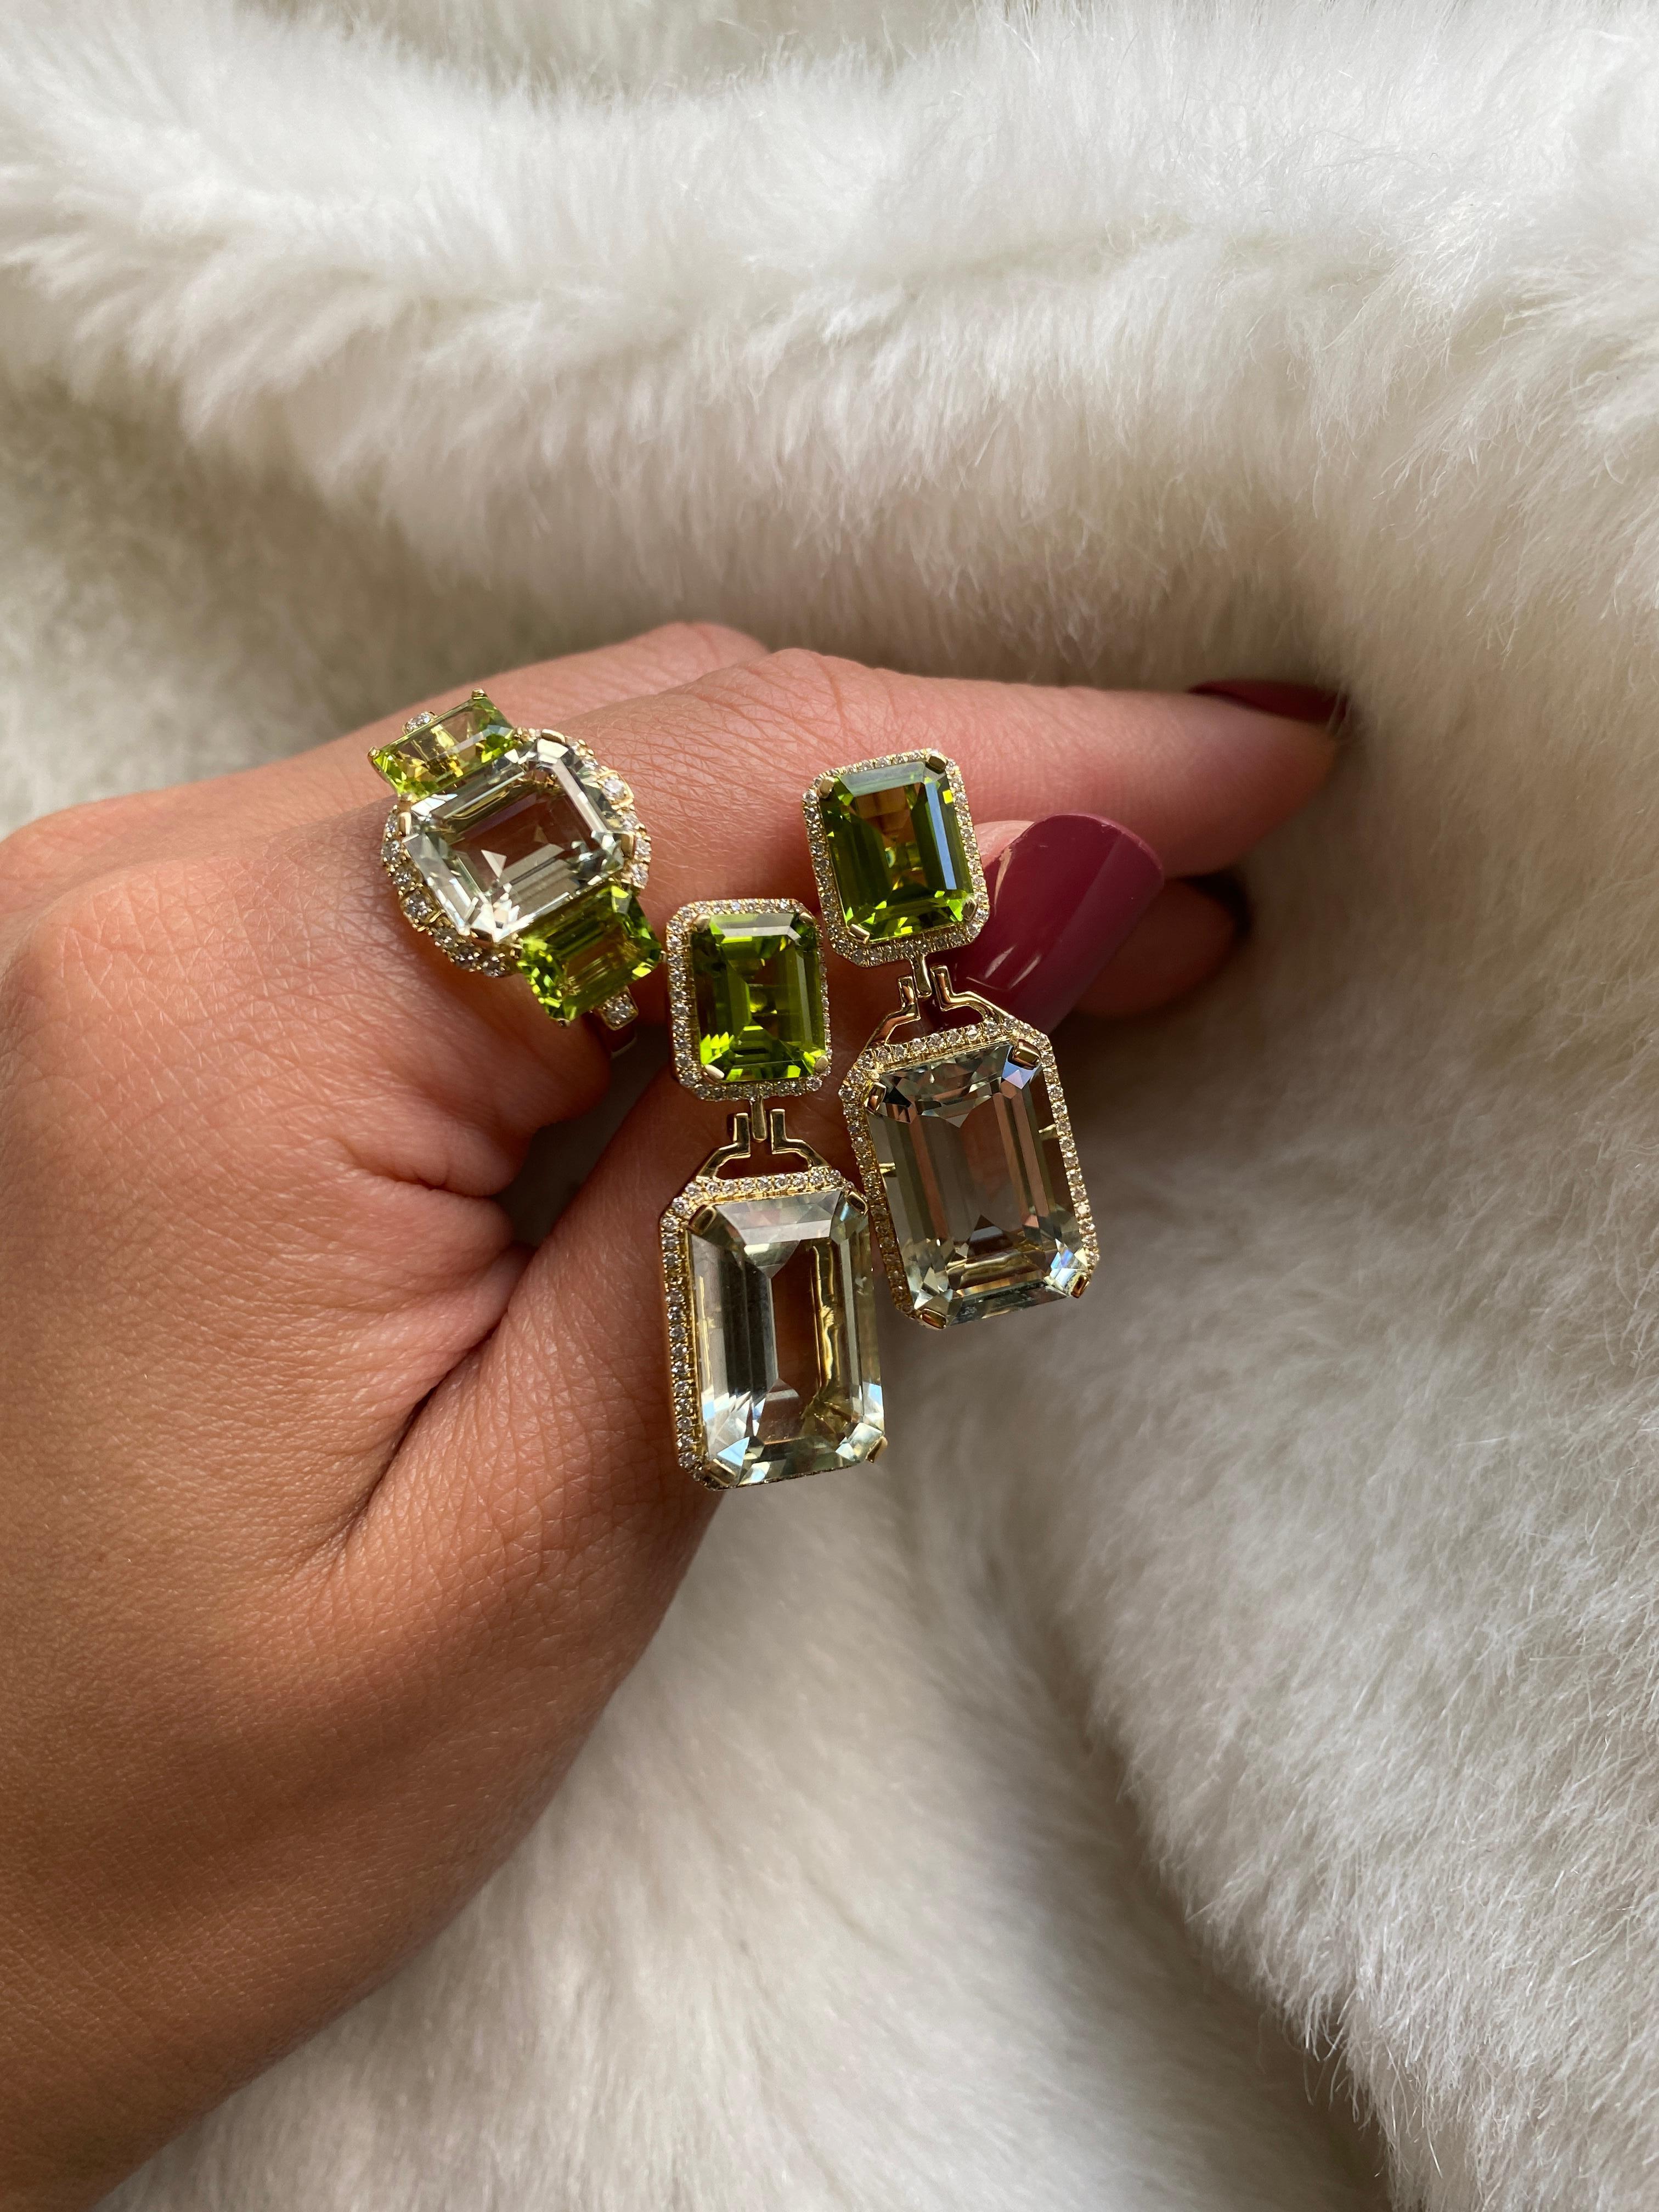 Unique combination of Prasiolite & Peridot 3 Stone Emerald Cut Ring with Diamonds set in 18K Yellow Gold. From our popular 'Gossip' Collection, this piece carries a hint of shock value.

* Stone Size: 10 x 8 - 7 x 5 mm
* Gemstone: 100% Earth Mined